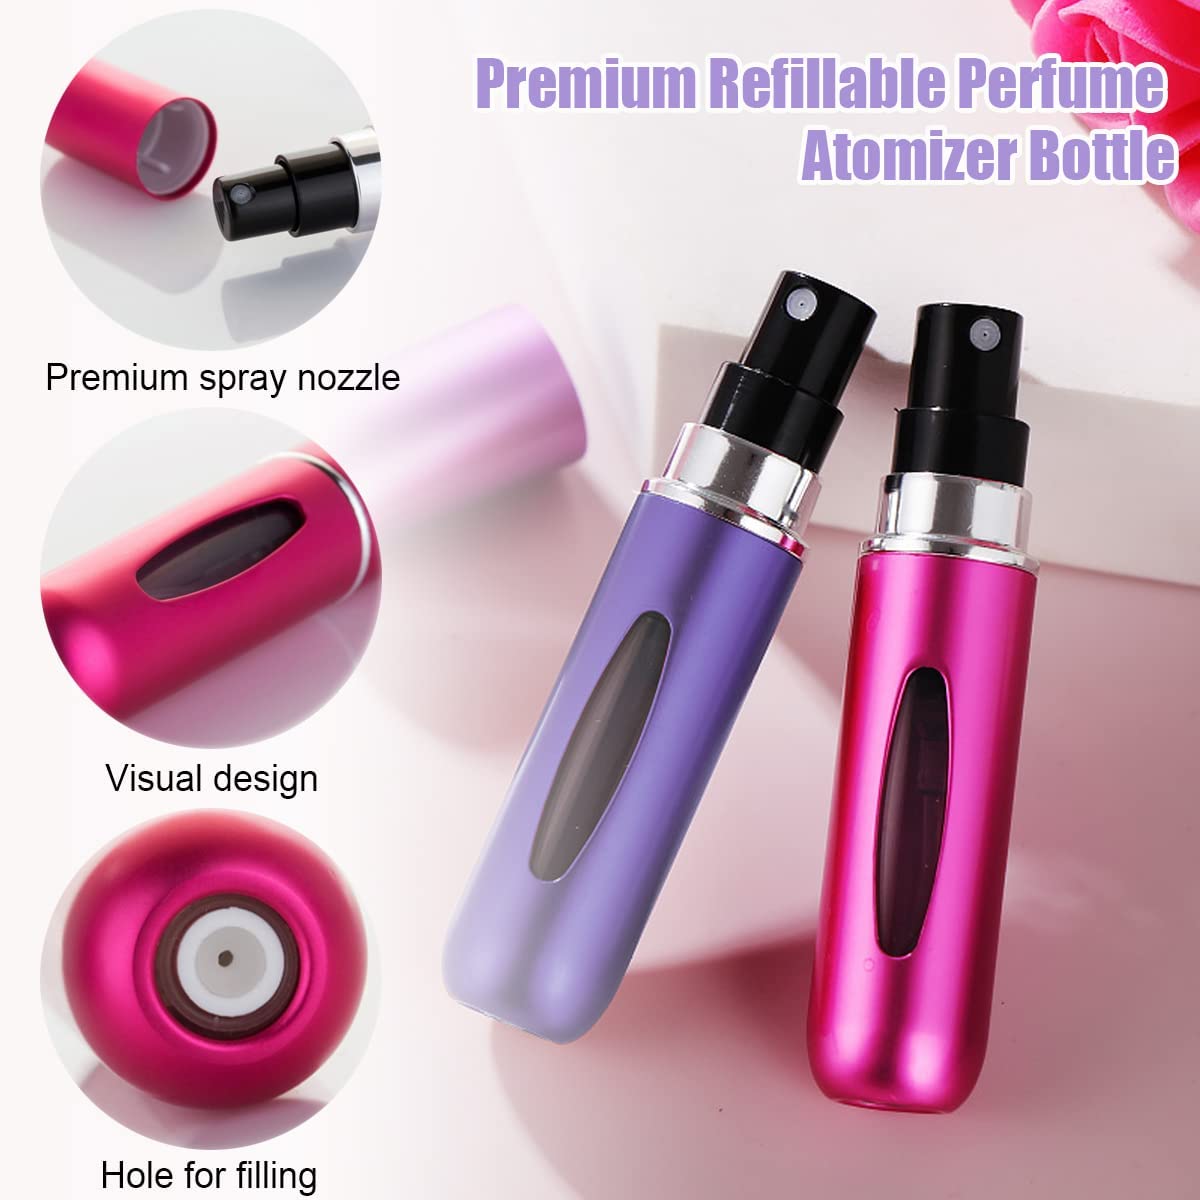 An elegant and portable perfume refill bottle, perfect for carrying in your pocket, showcasing a Pocket Size Perfume Atomizer